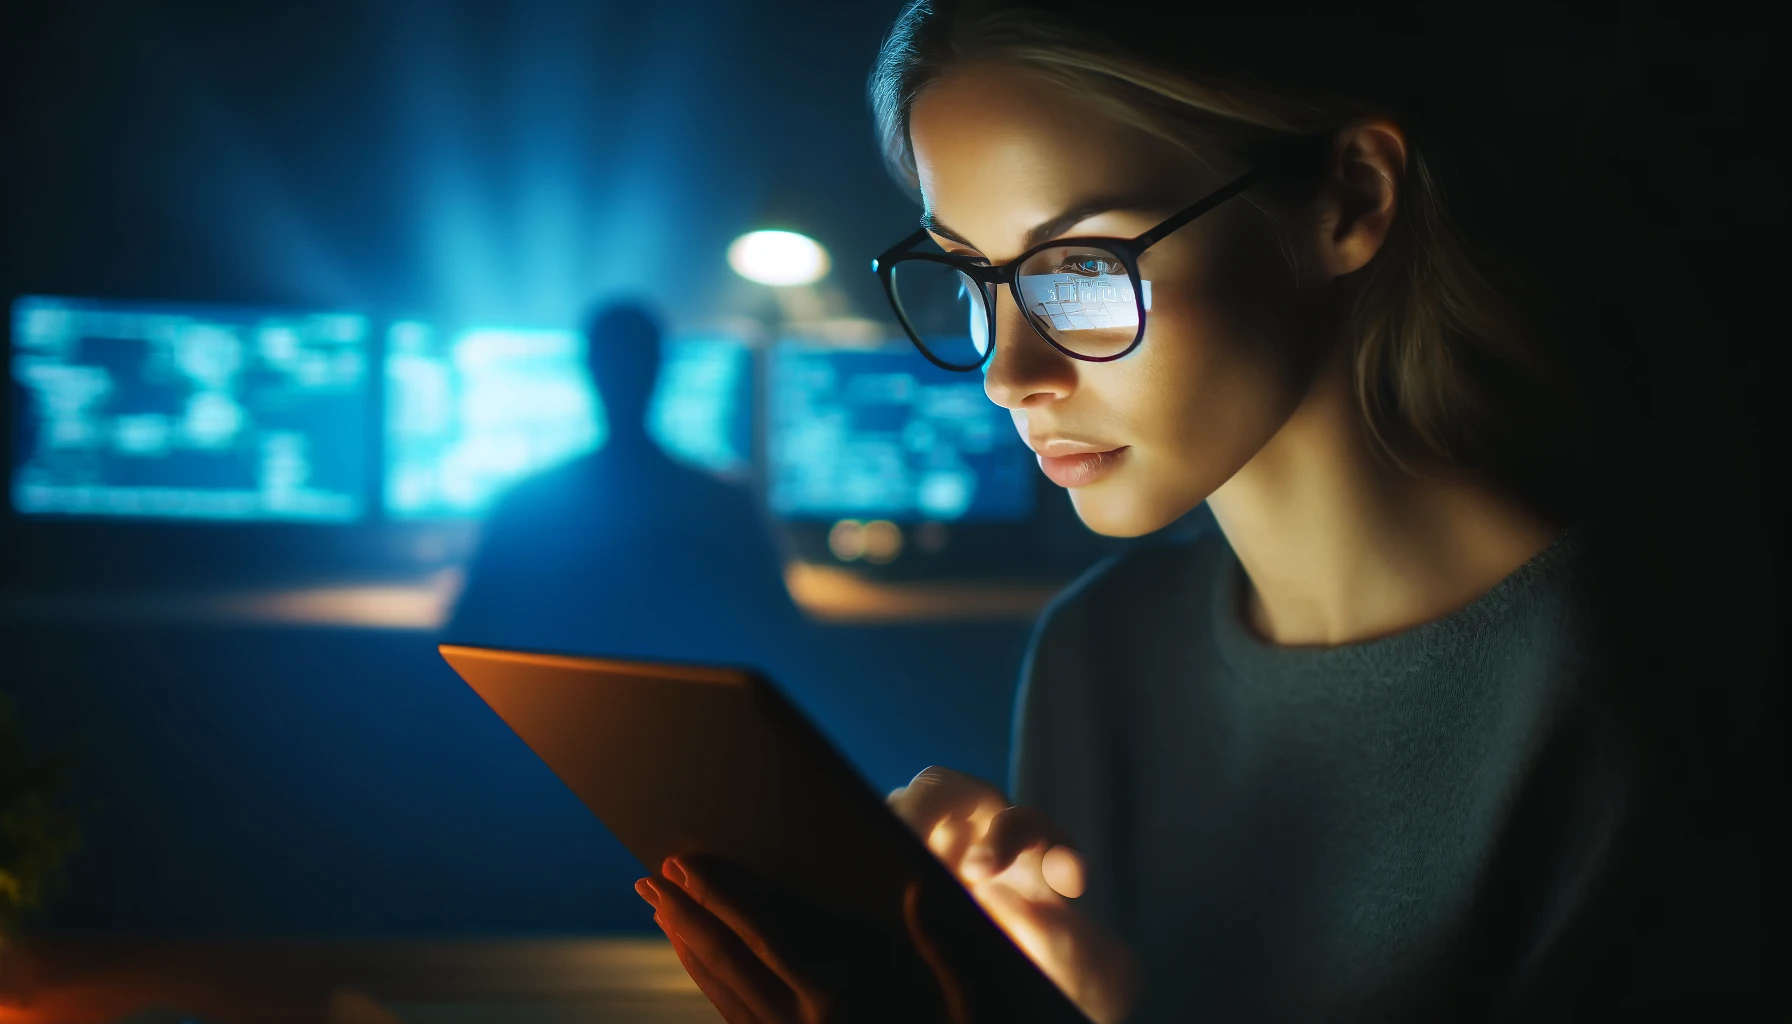 Focused woman in a dimly lit room, intently starring a tablet screen for Biometric authentication